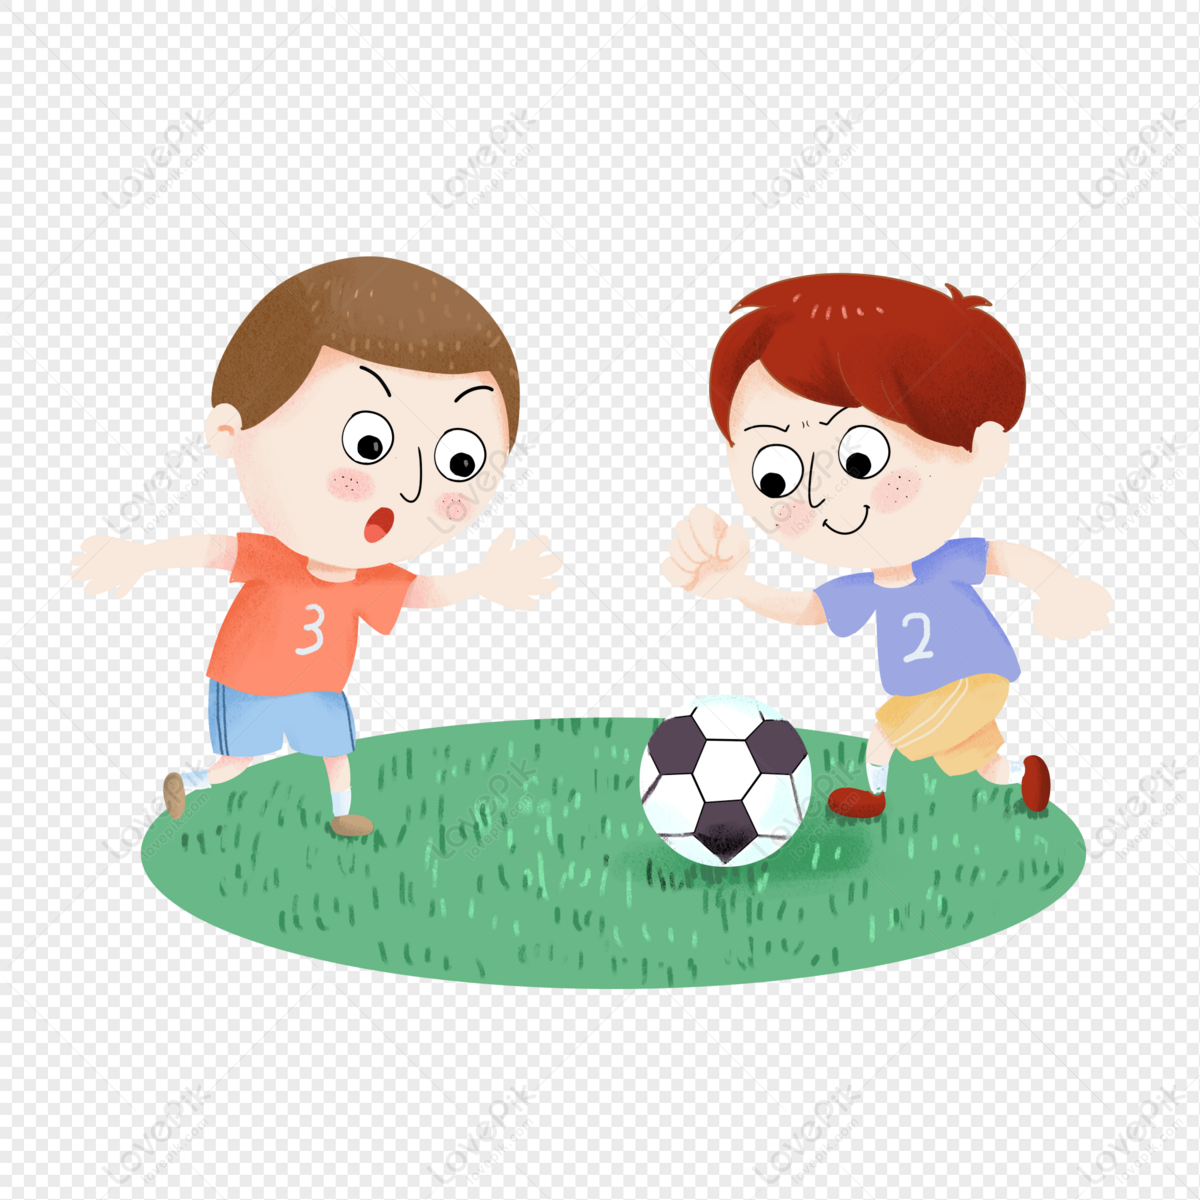 Cartoon Boy Playing Football PNG Picture And Clipart Image For Free  Download - Lovepik | 401363175